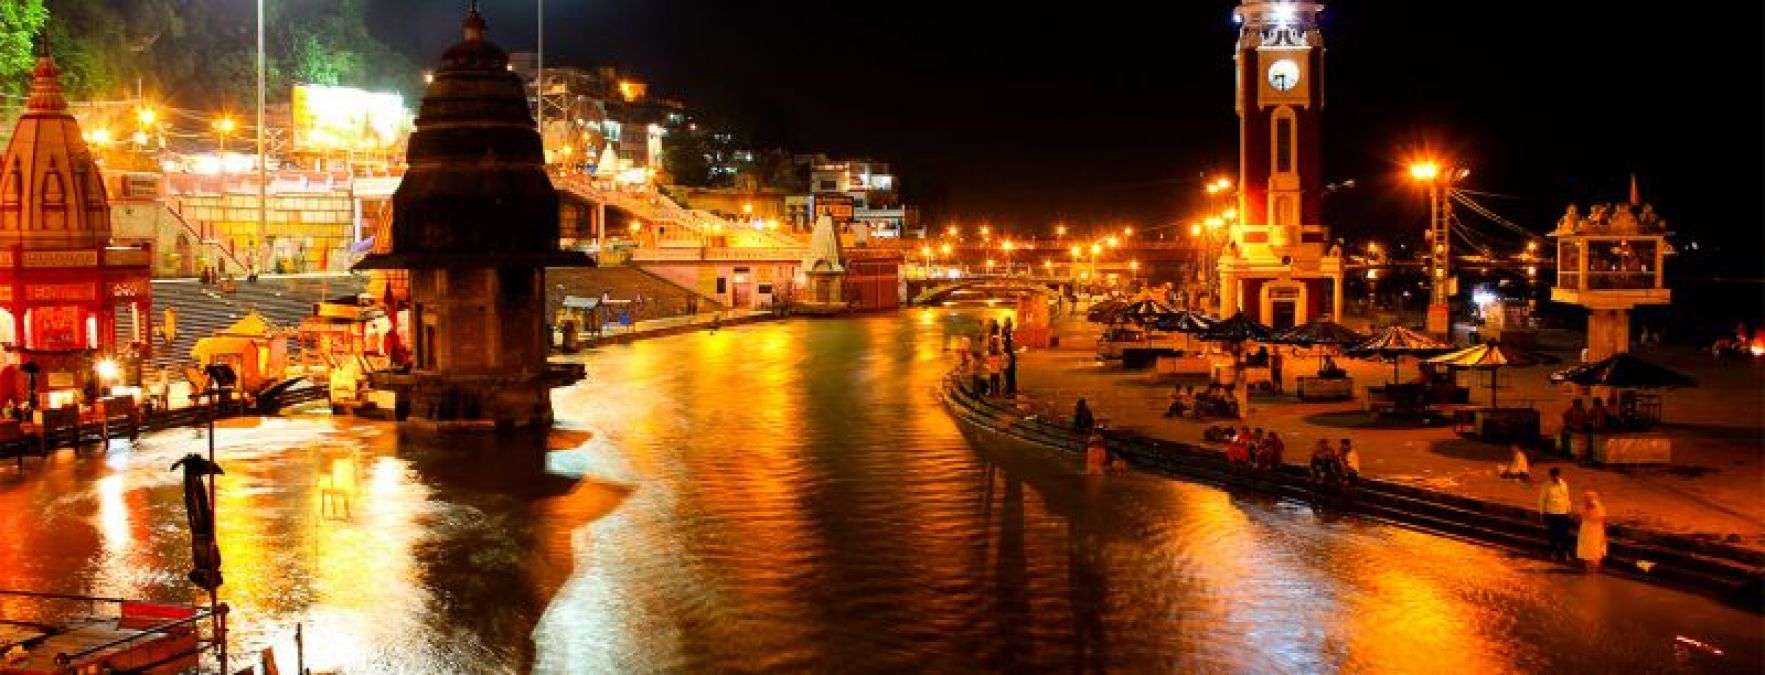 Your mind will be connected with these places of Haridwar